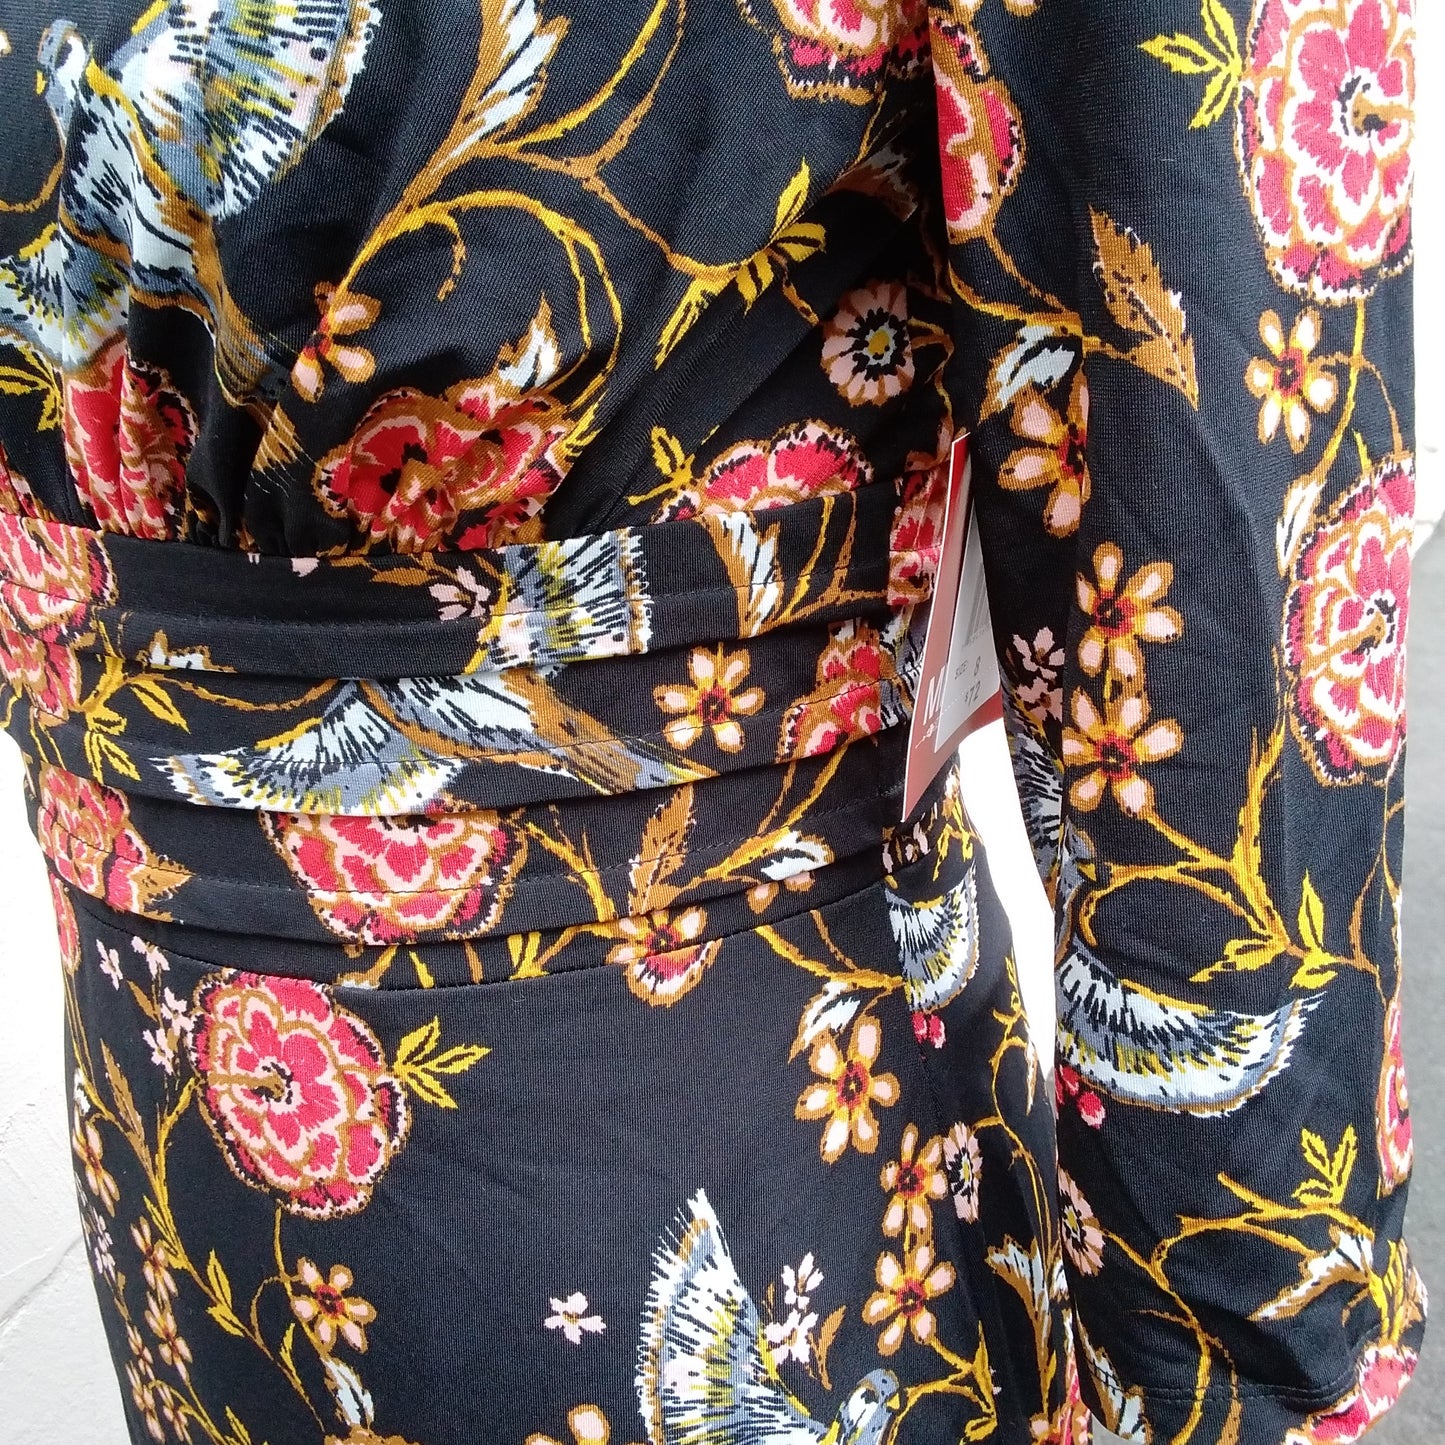 NWT - MELROSE black multicolored Floral 3/4 Sleeve Dress - 8